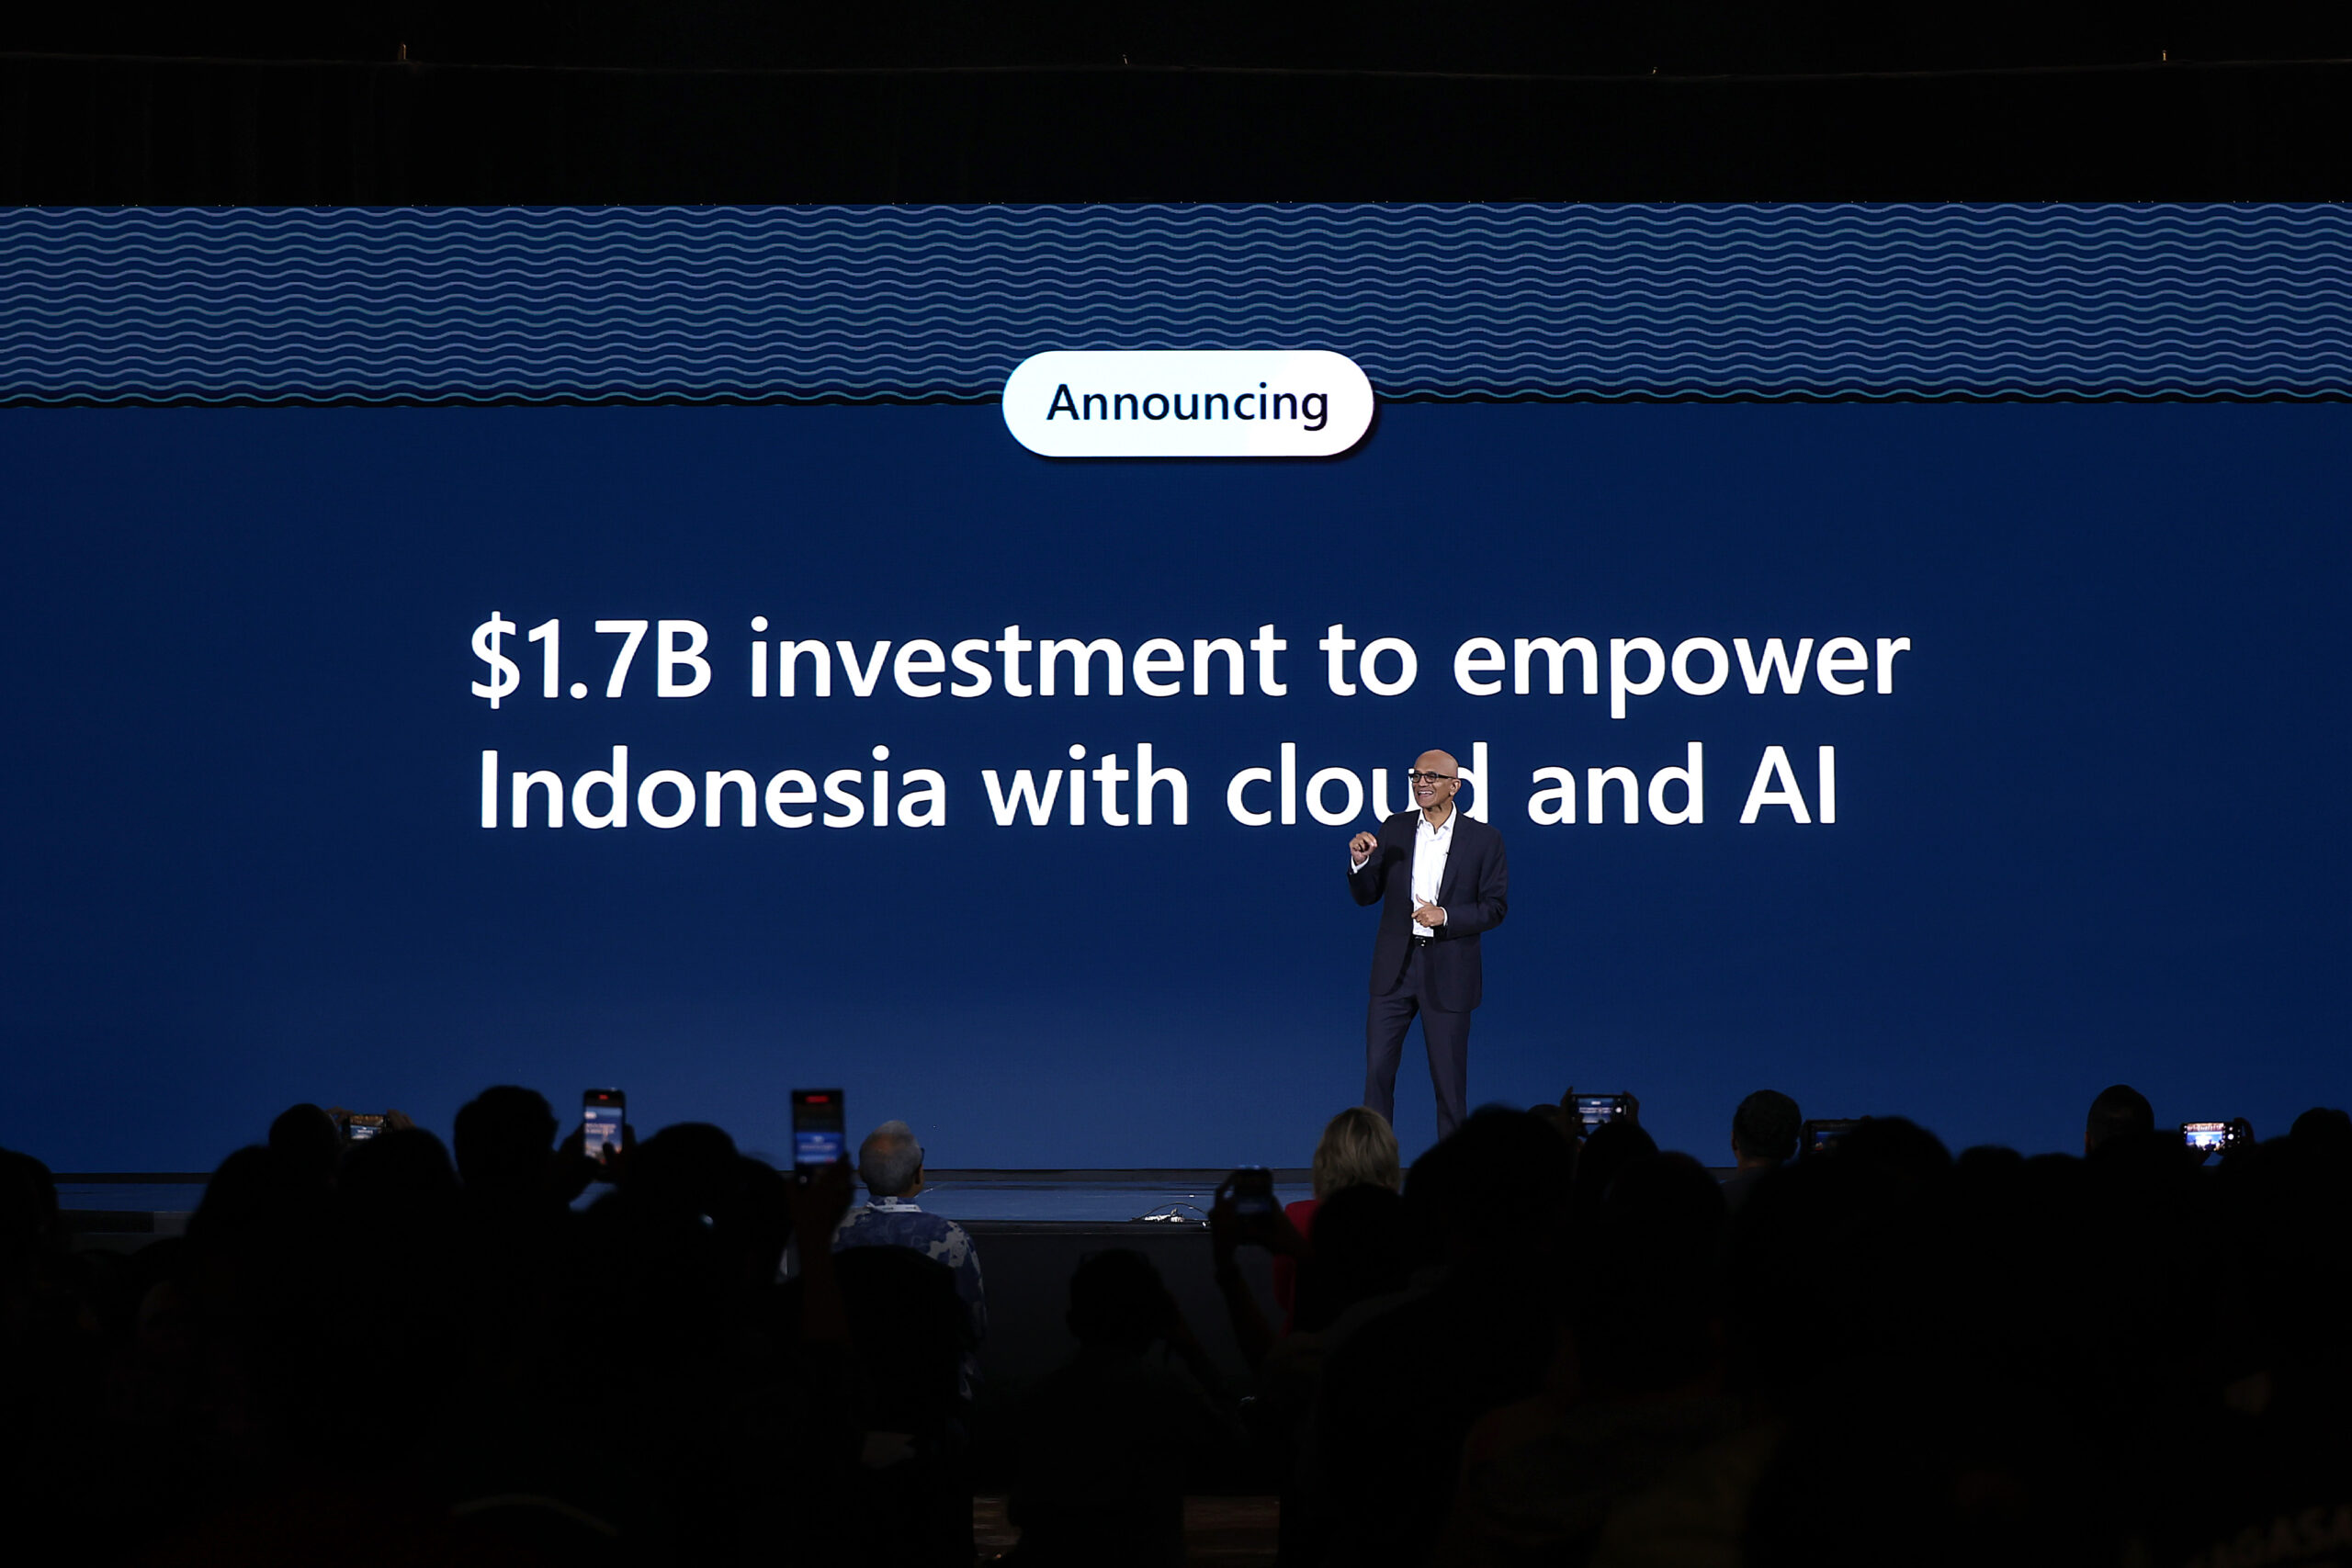 A man on stage making an investment announcement in Indonesia